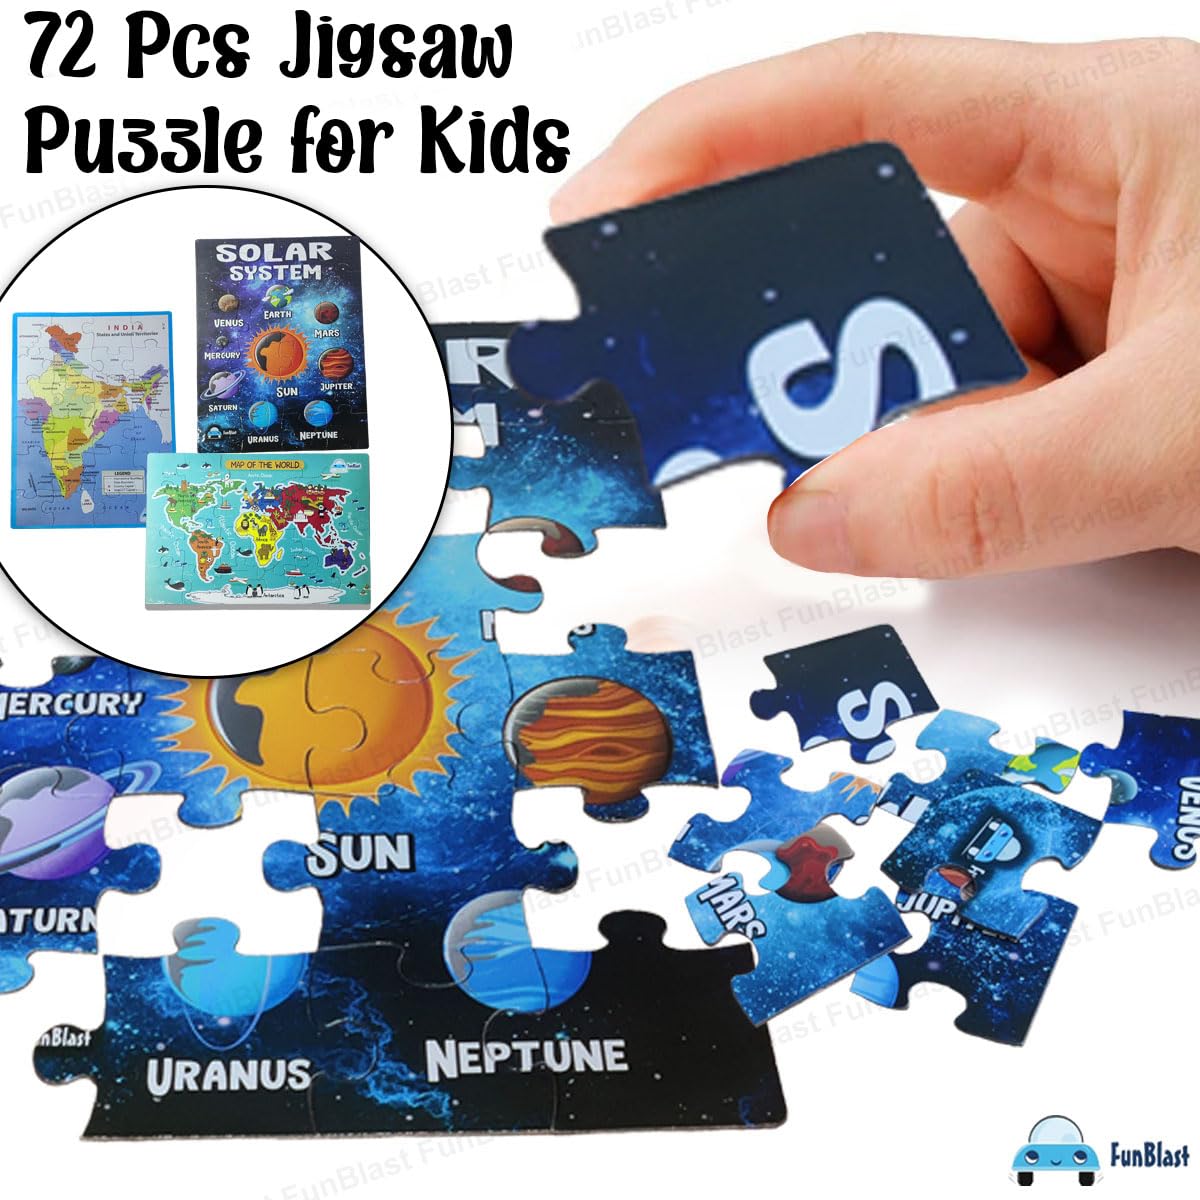 3 in 1 Jigsaw Puzzle for Kids - Solar System, Map of India and World Map Jigsaw Puzzles, Learning and Educational Puzzles for Children – 72 Pcs Puzzles